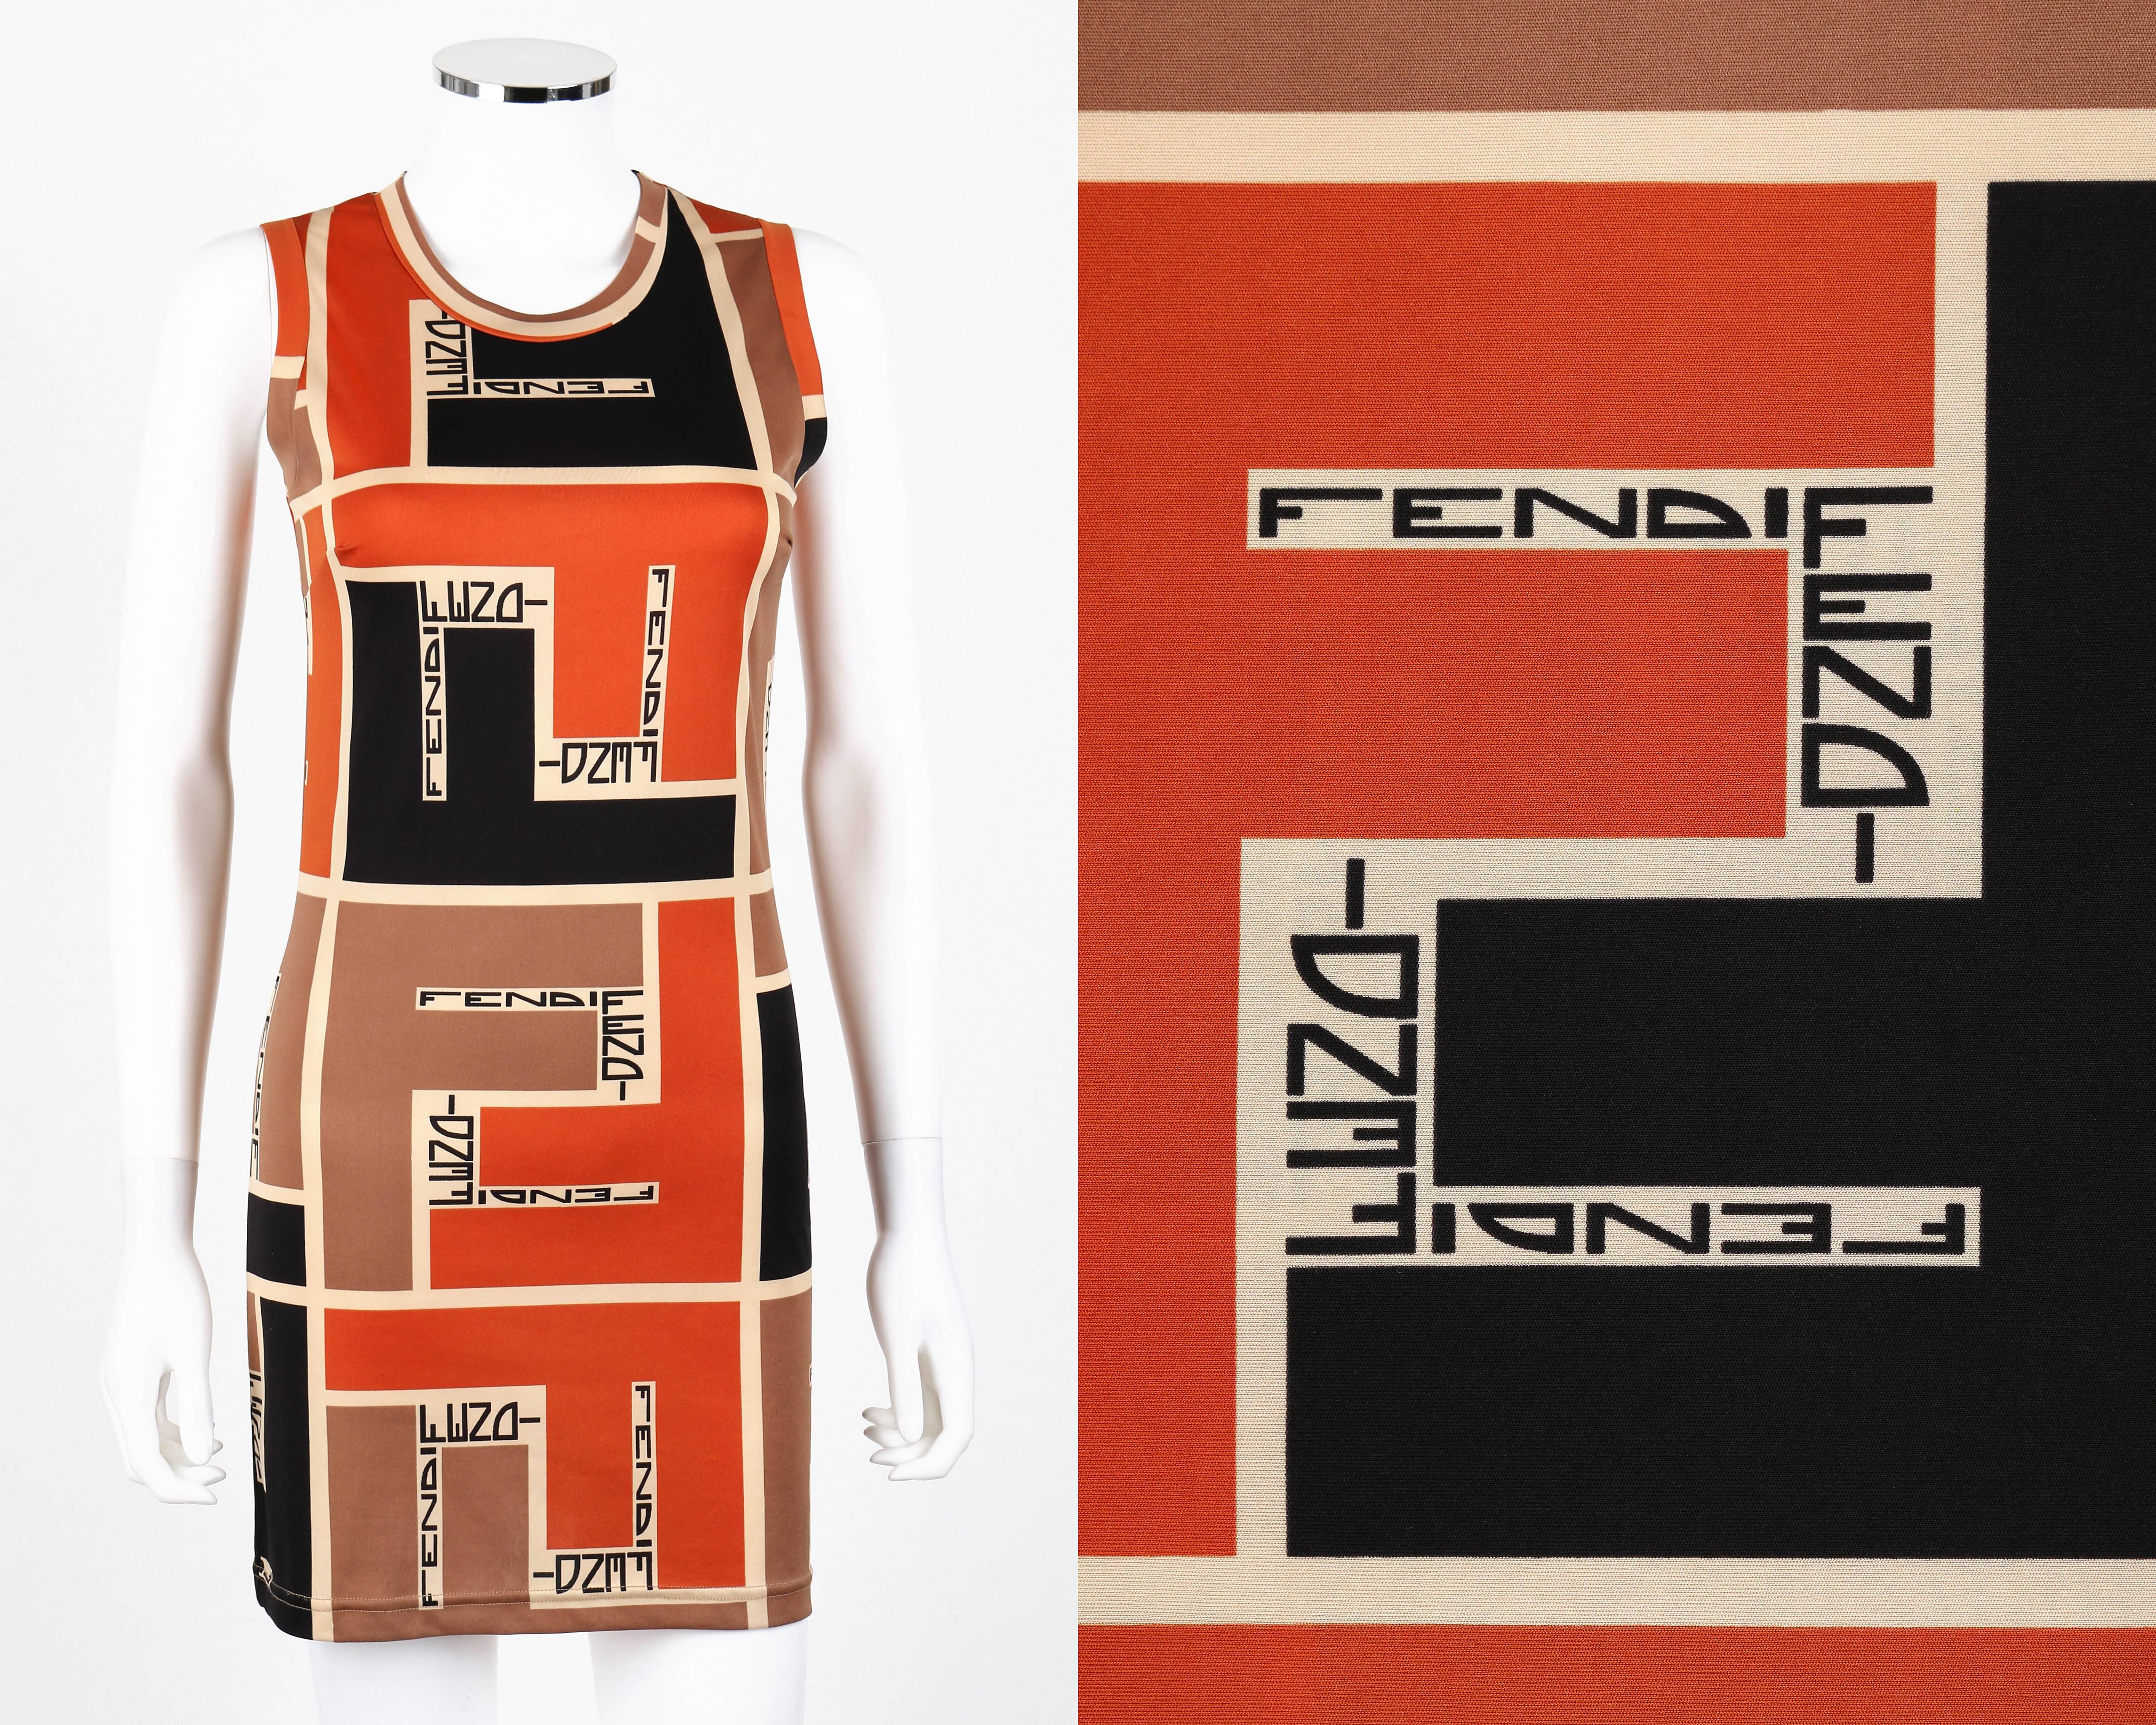 Fenci Mare c.1990's color-block zucca FF monogram print knit shift dress. Designed by Karl Lagerfeld. Large color-blocked Zucca 